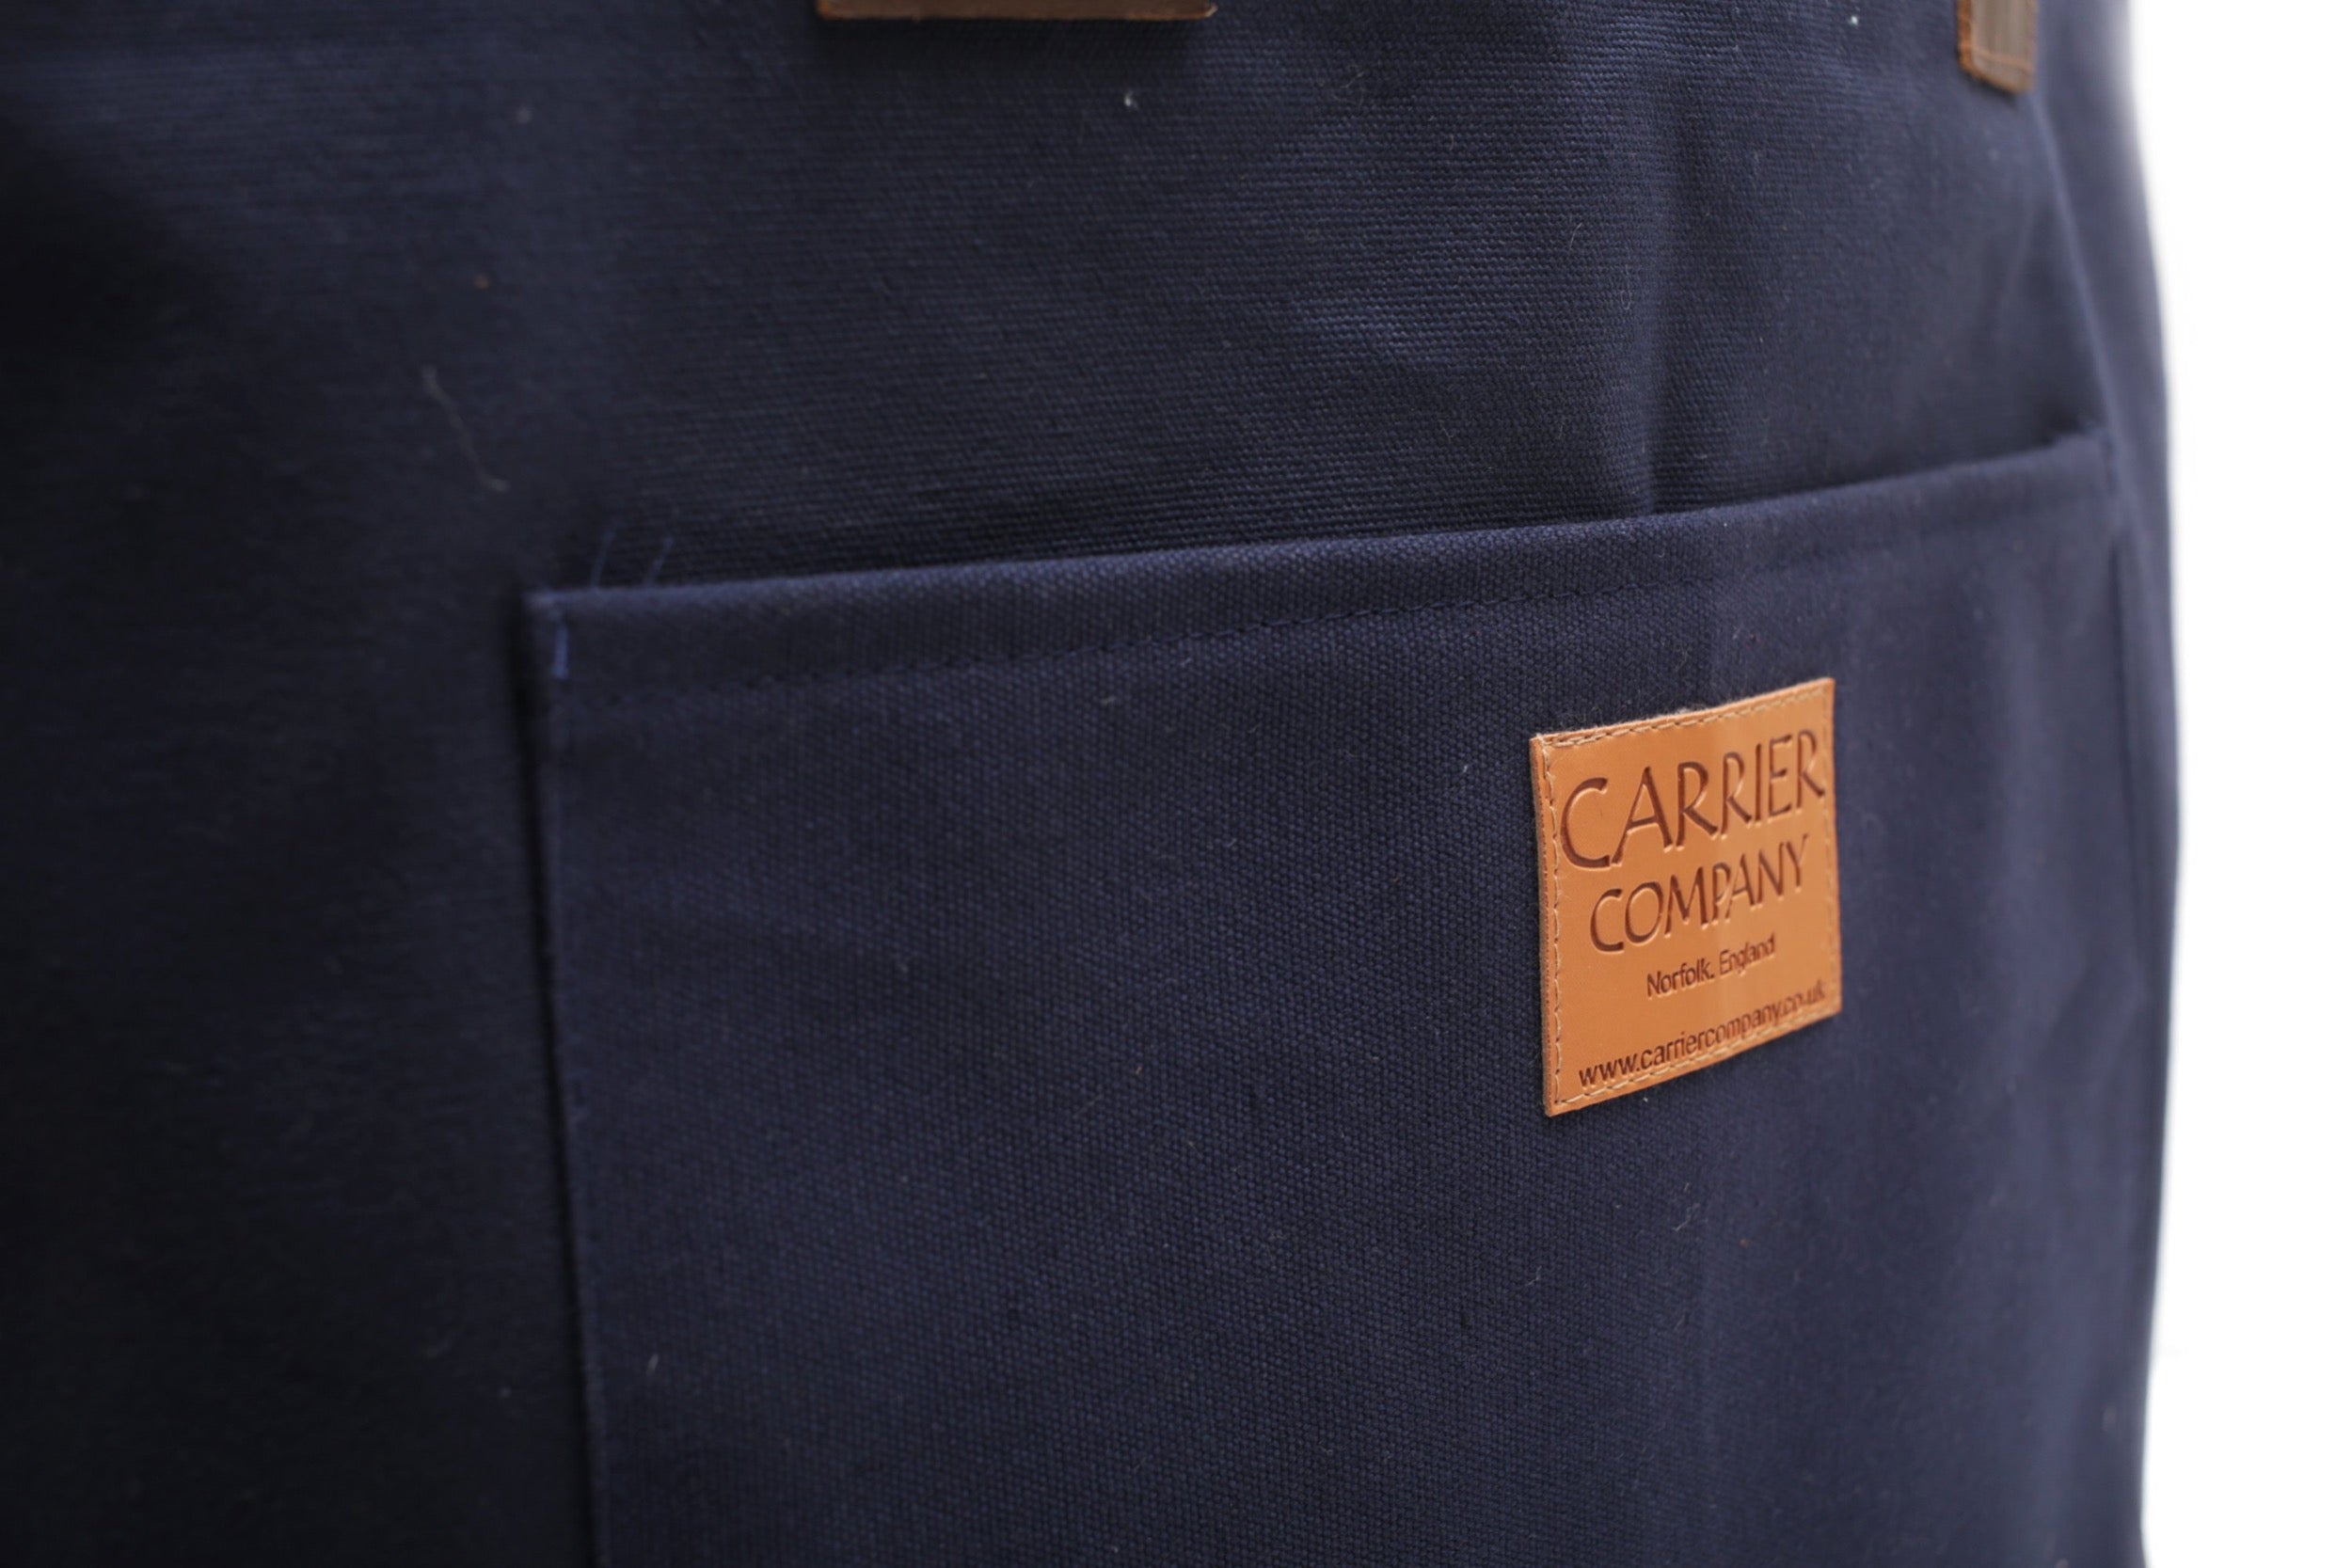 Carrier Company Sturdy bag in Navy